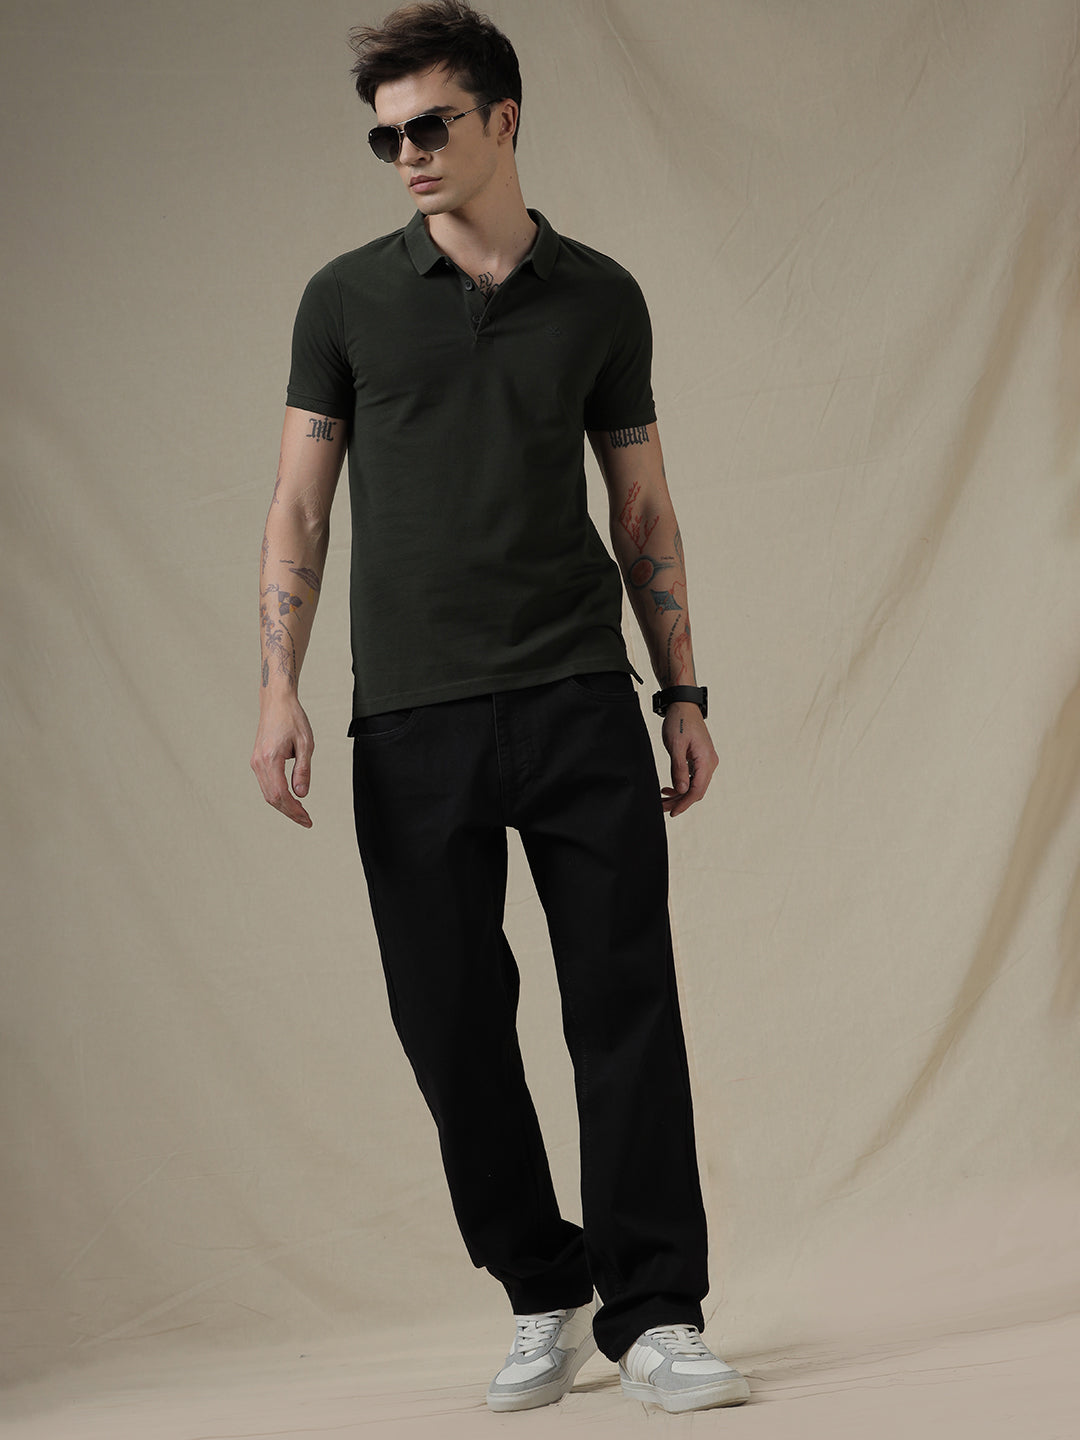 Solid Olive Elite Polo T-Shirt